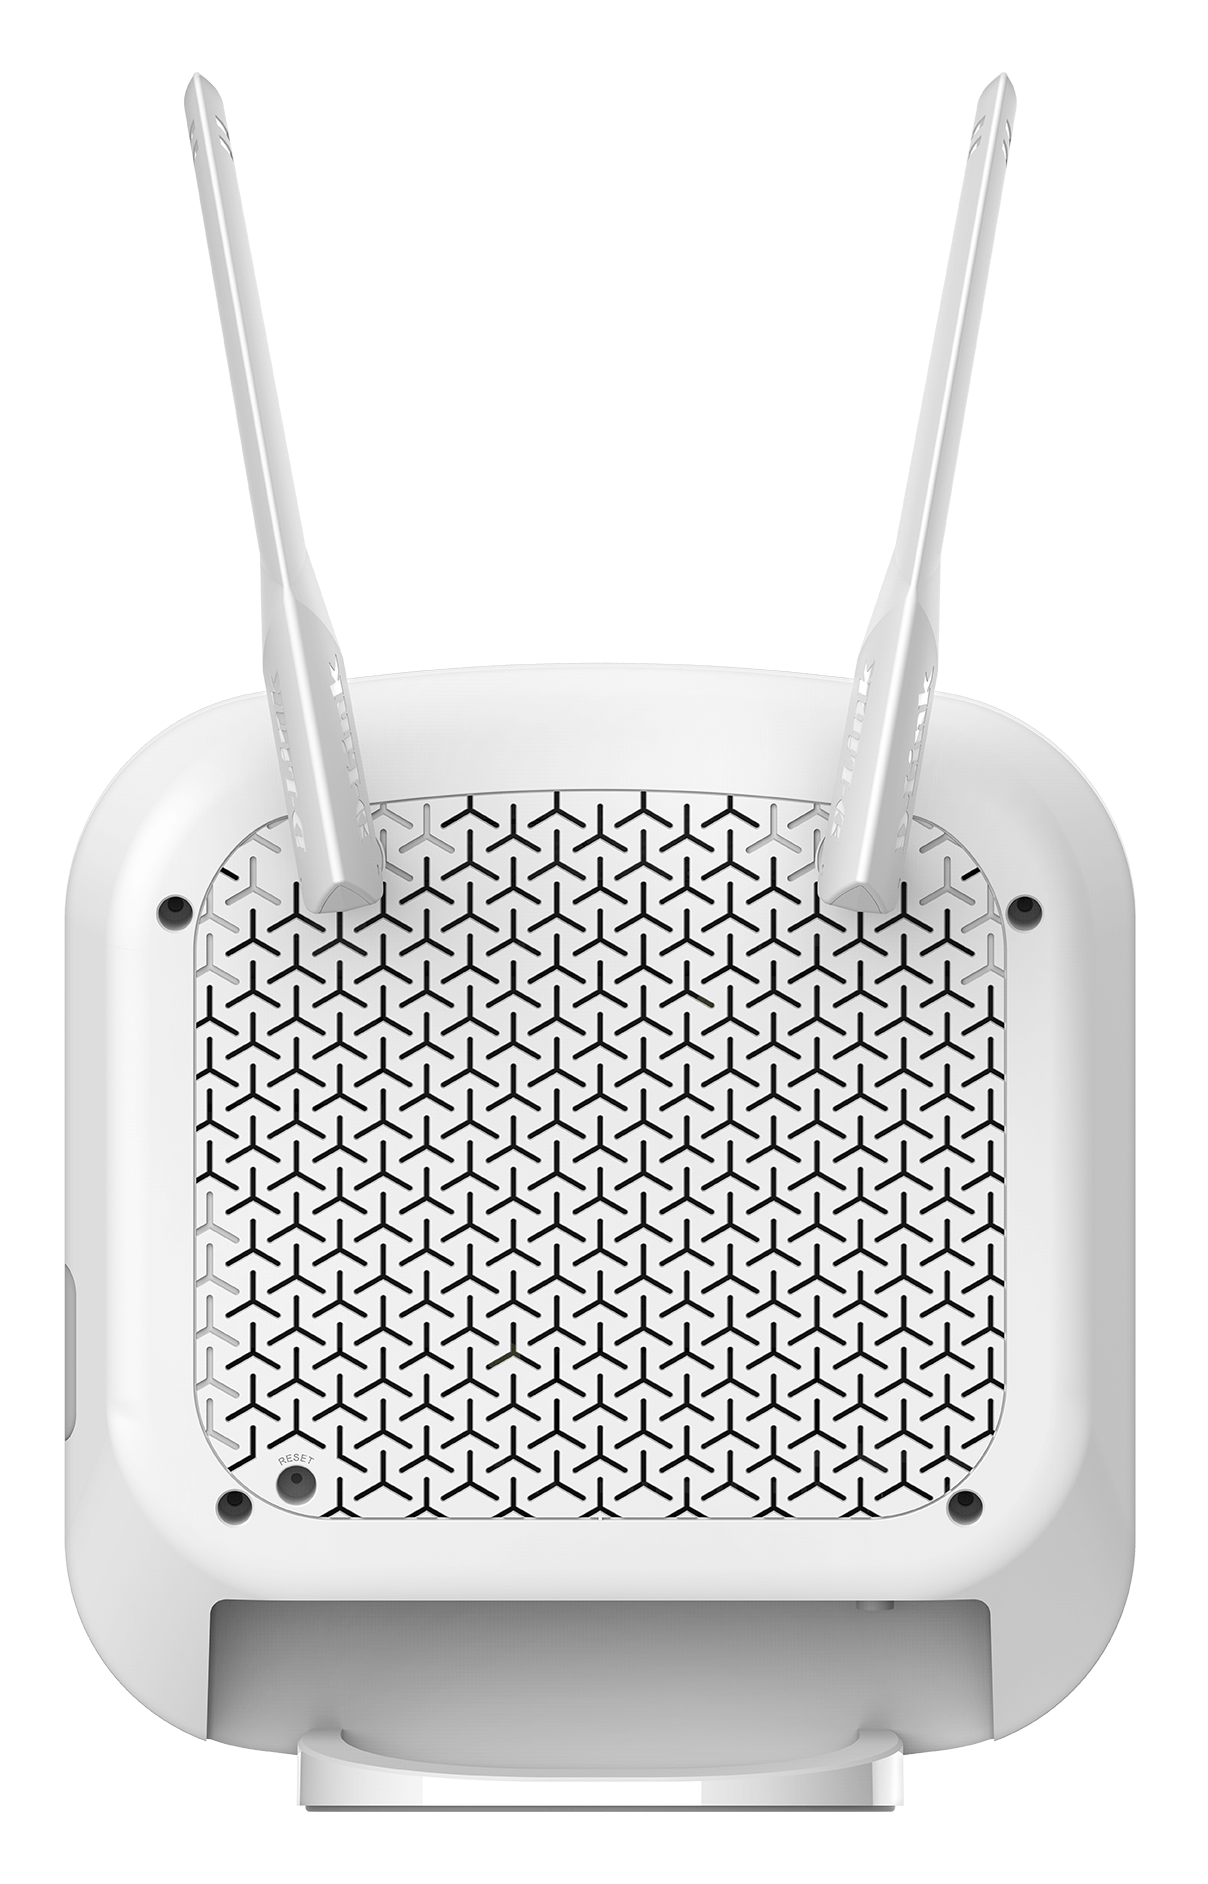 DWR-978 - 5G AC2600 Wi-Fi Router - Back view.